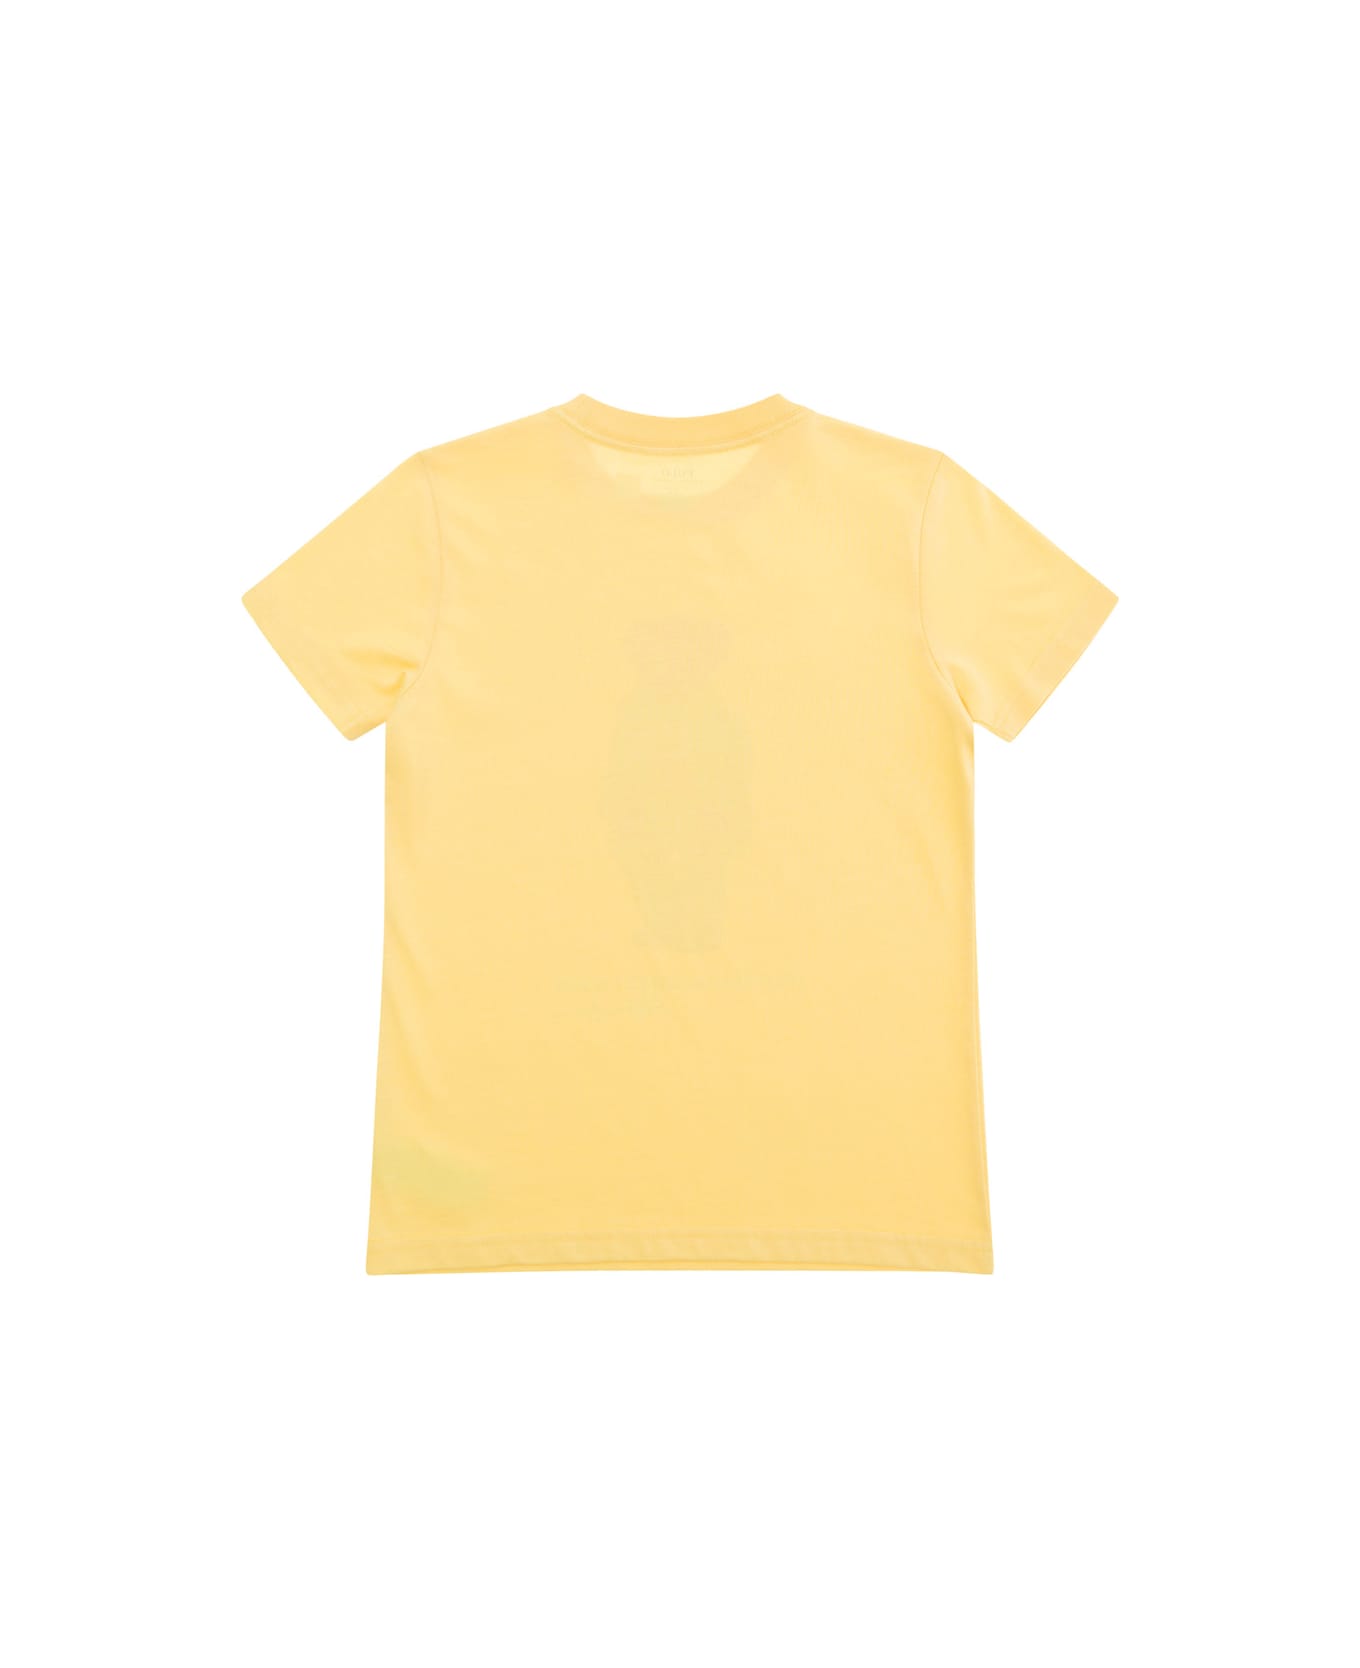 Ralph Lauren Yellow Crew Neck T-shirt With Front Bear Print In Cotton Boy - Giallo Tシャツ＆ポロシャツ